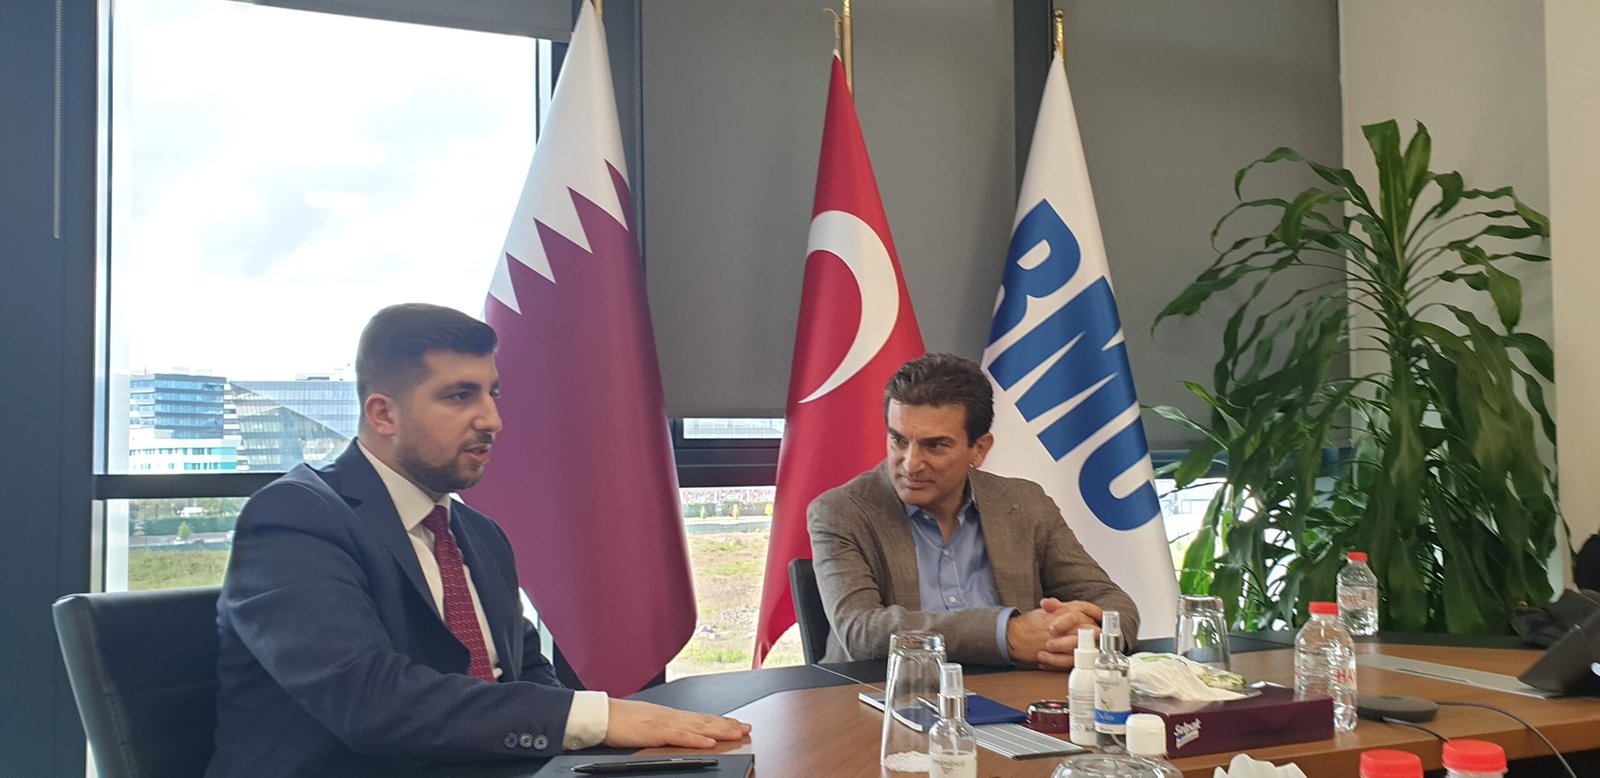 Qatar and Turkey Moving Fast Forward With Stronger Trade Ties